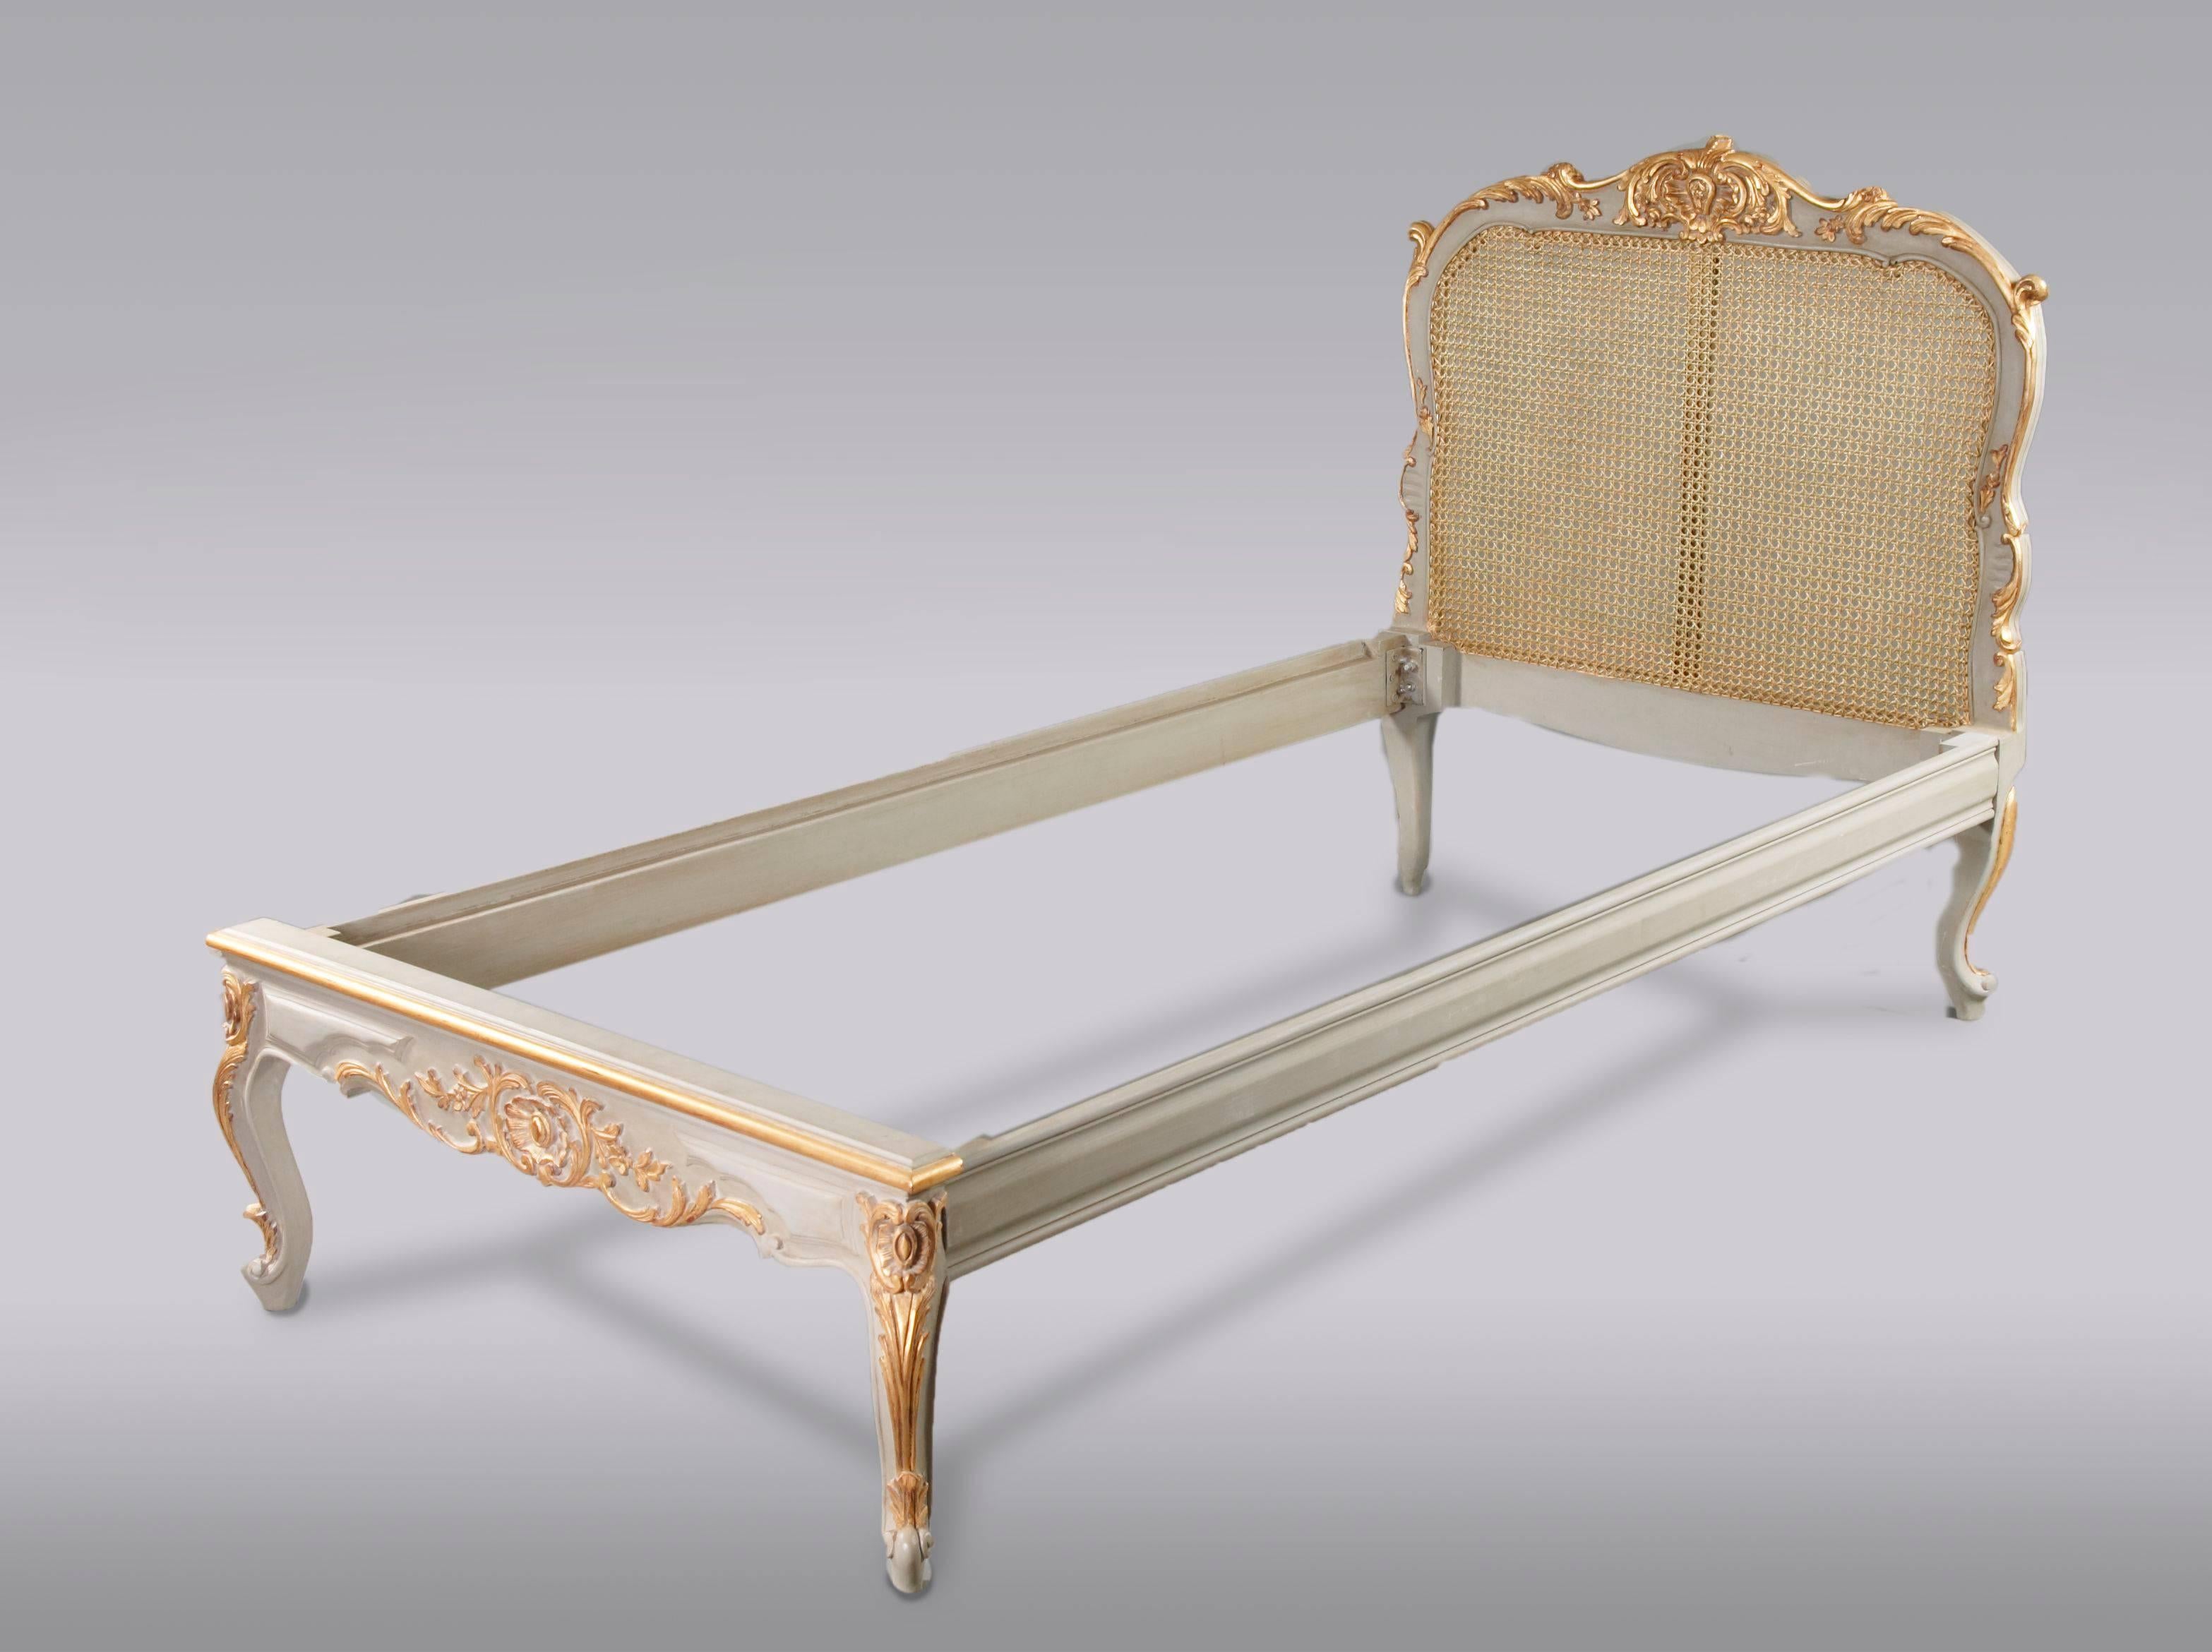 20th Century, Louis XV Style, Single Bed In Good Condition For Sale In Berlin, DE